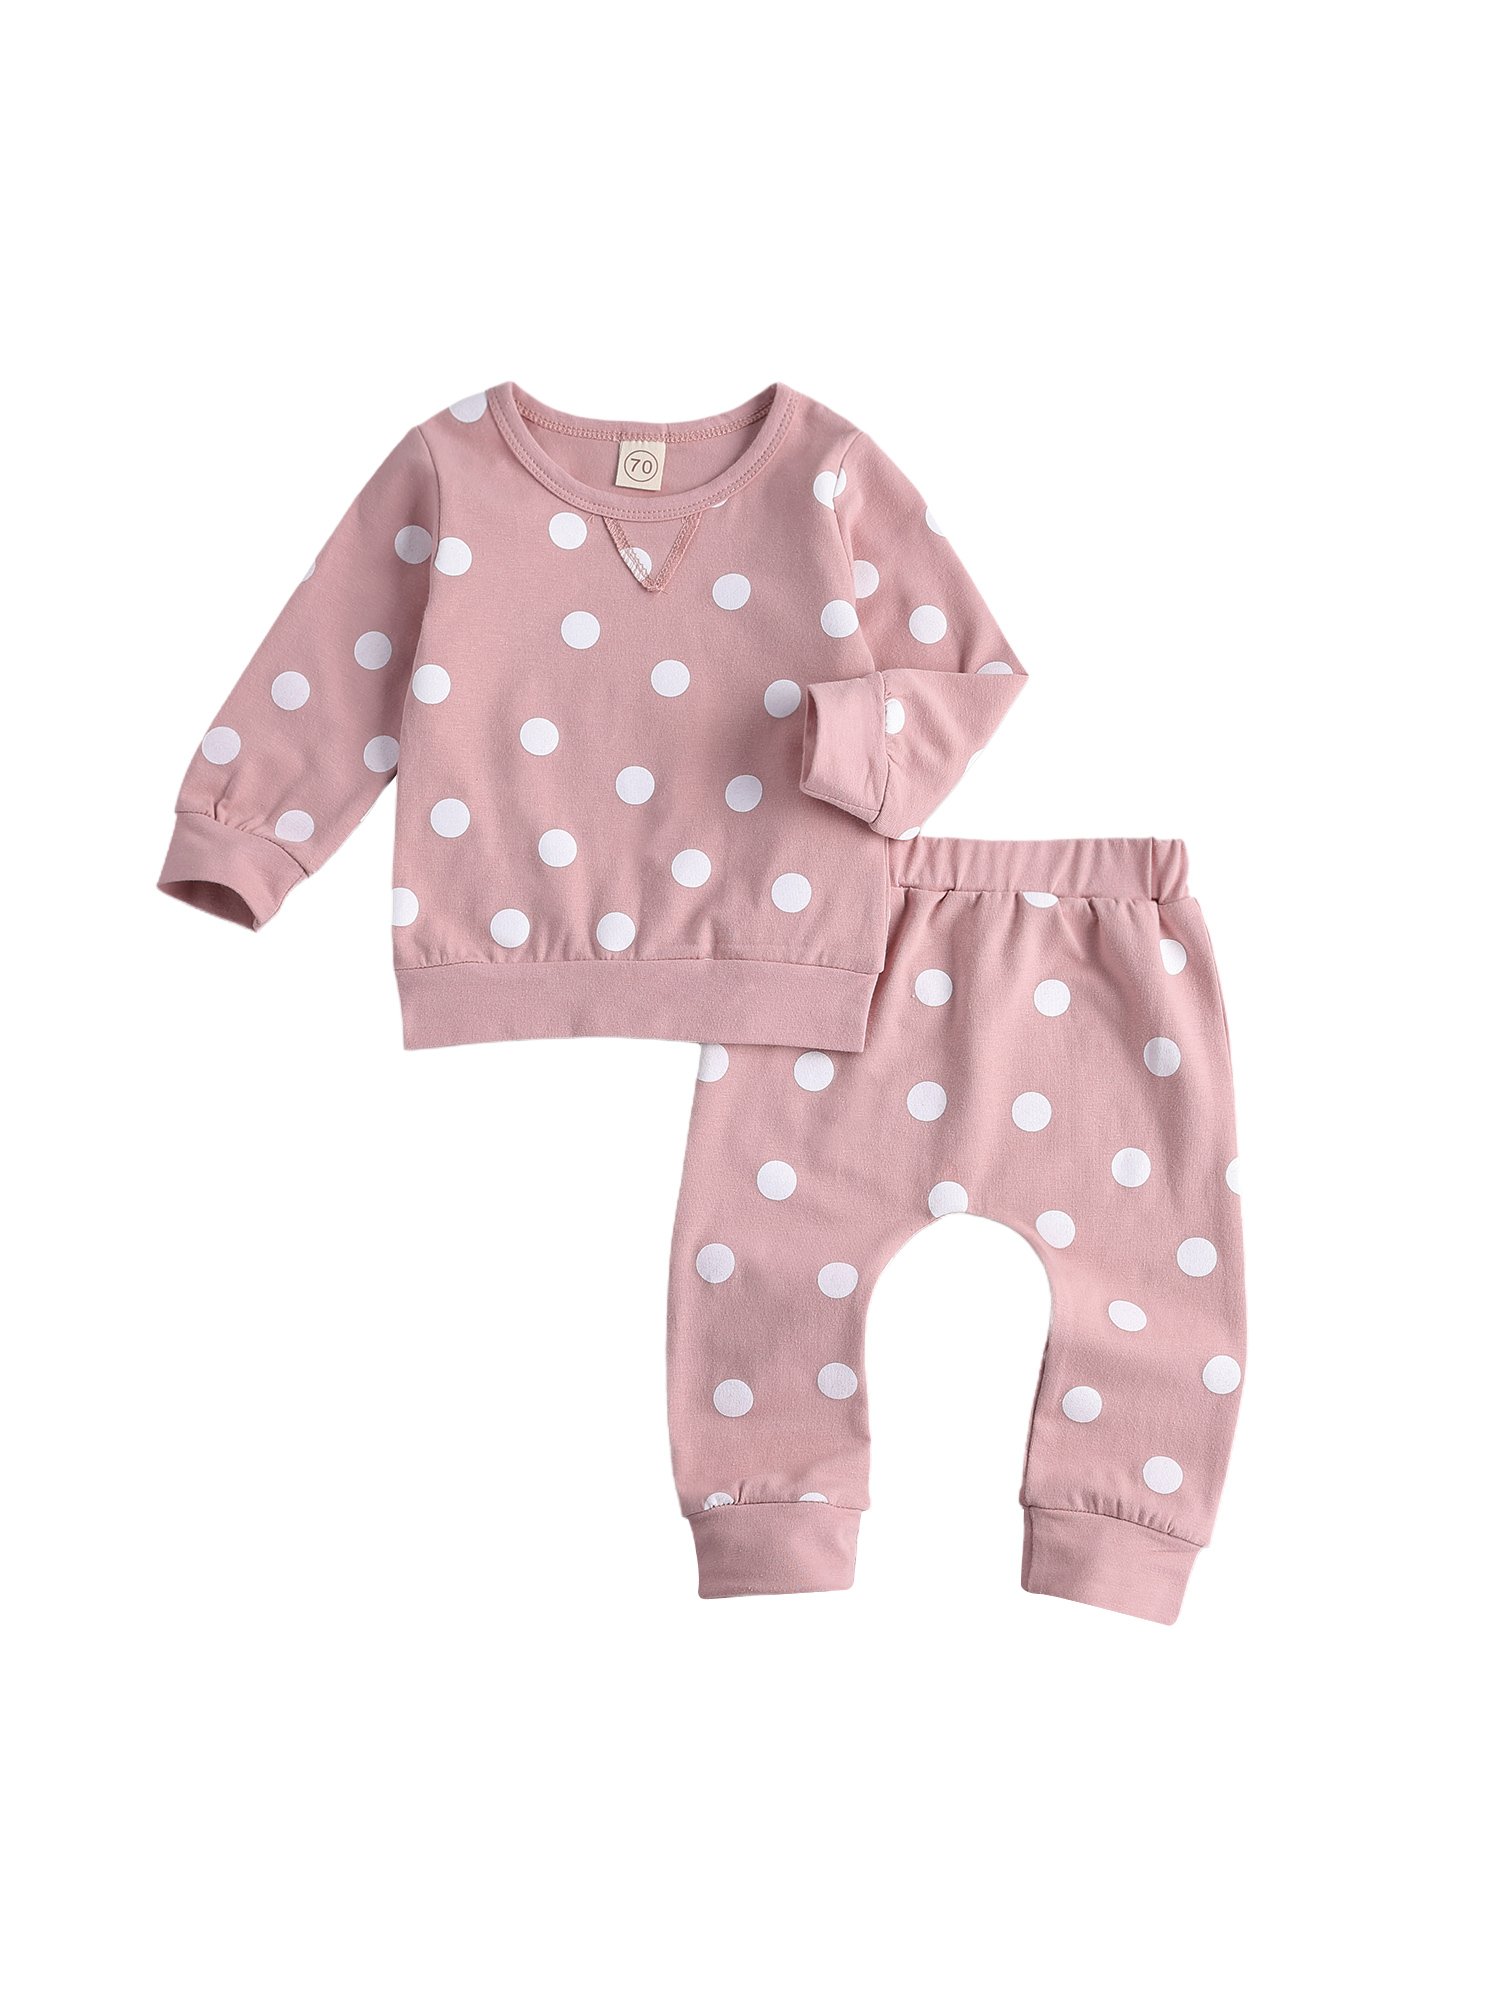 Izhansean Newborn Infant Baby Girl Clothes Set Long Sleeve Sweatshirts Tops Pants Outfits Pink 0-3 Months - image 3 of 7